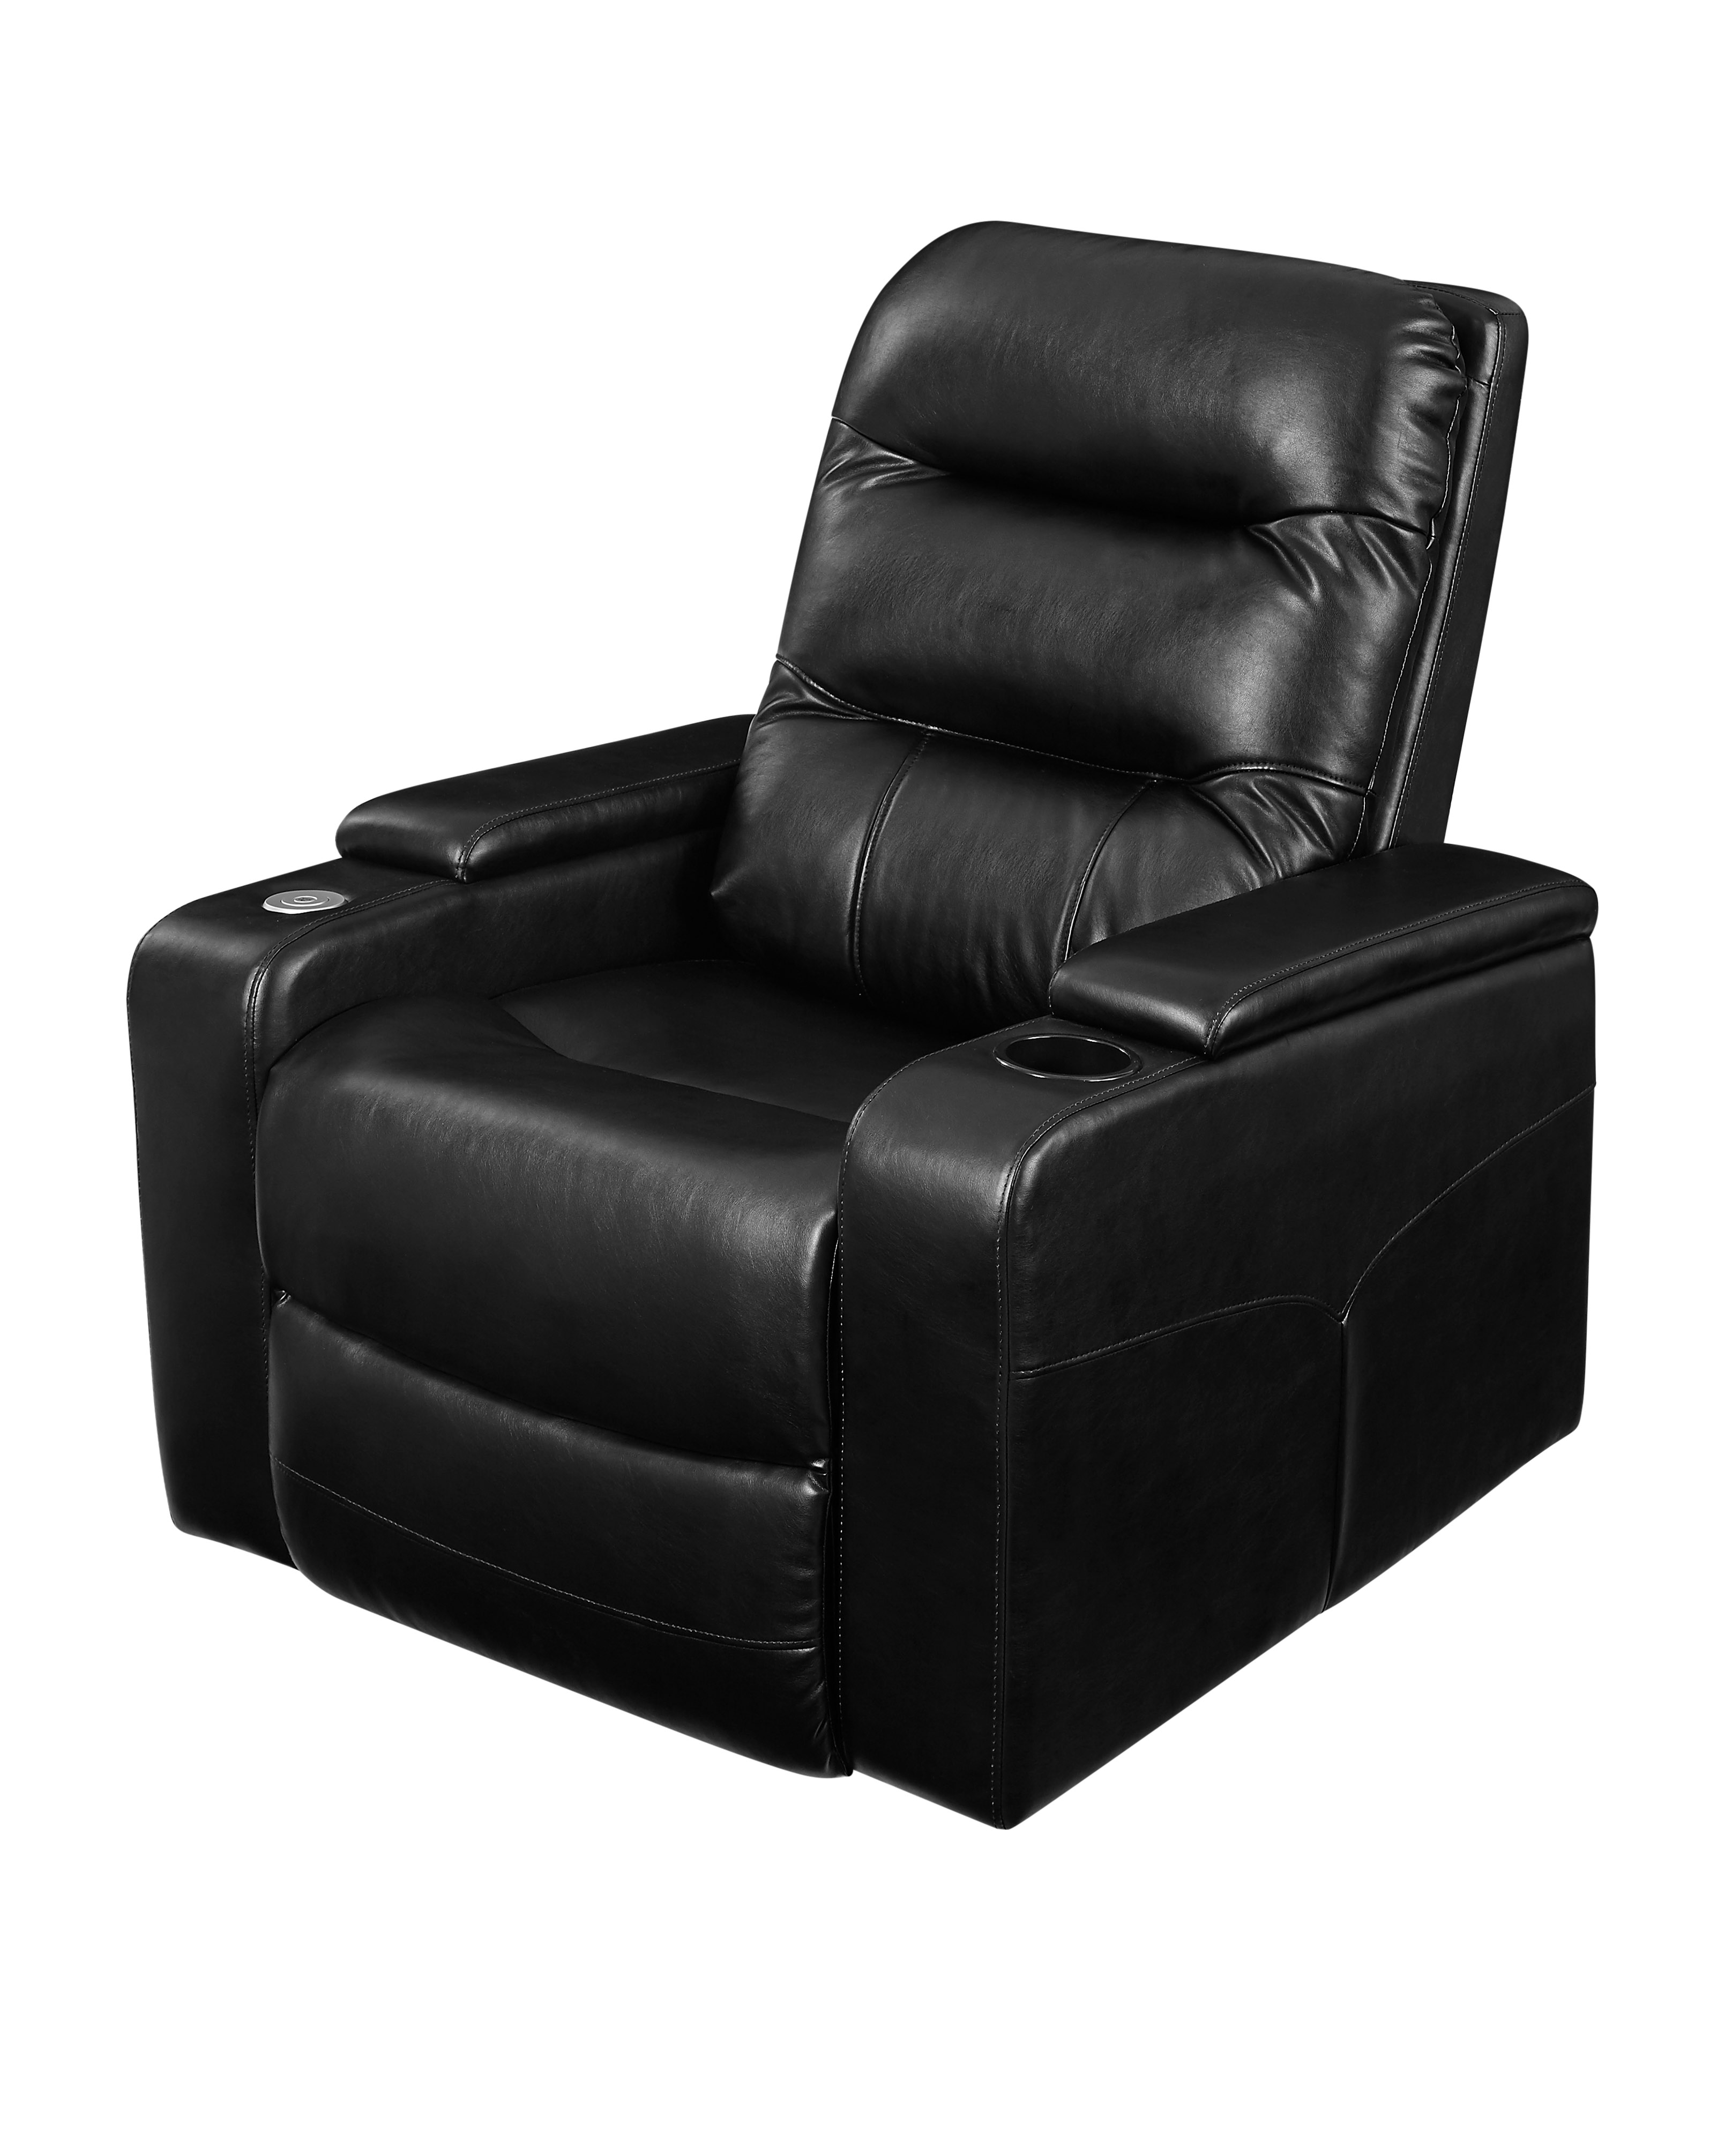 Relax-a-Lounger Lilac Manual Standard Recliner, Black Fabric - image 2 of 16